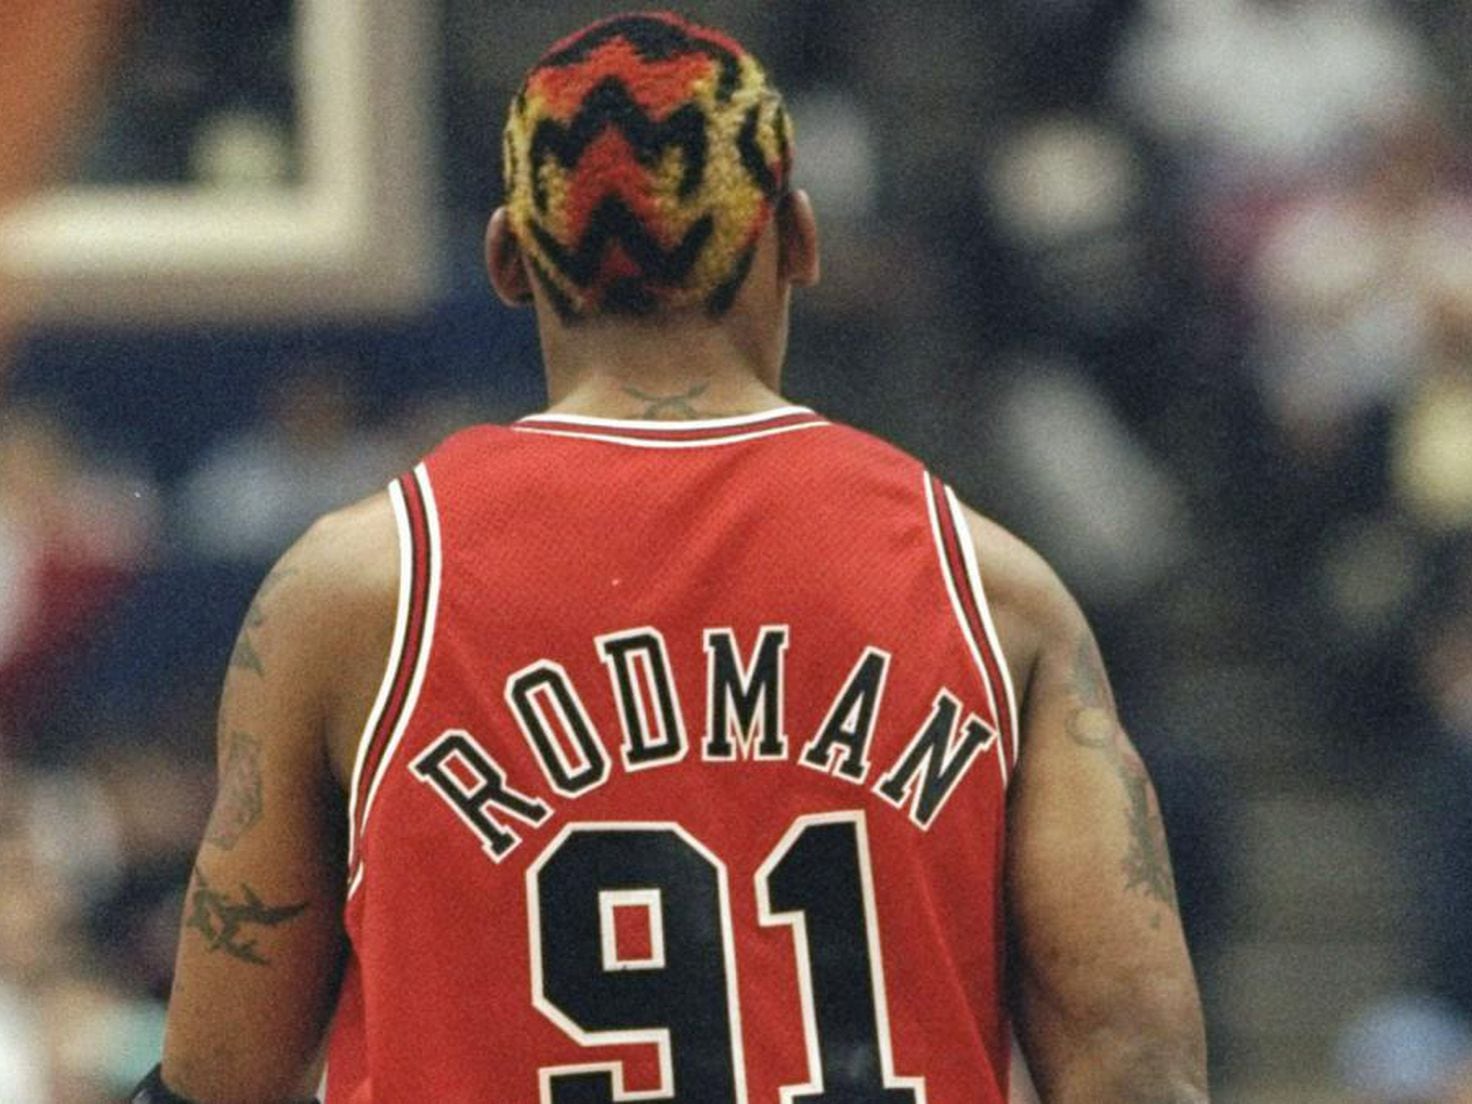 Did you know that Dennis Rodman once played for the LA Lakers? We look at  his stats, jersey number and more from that season